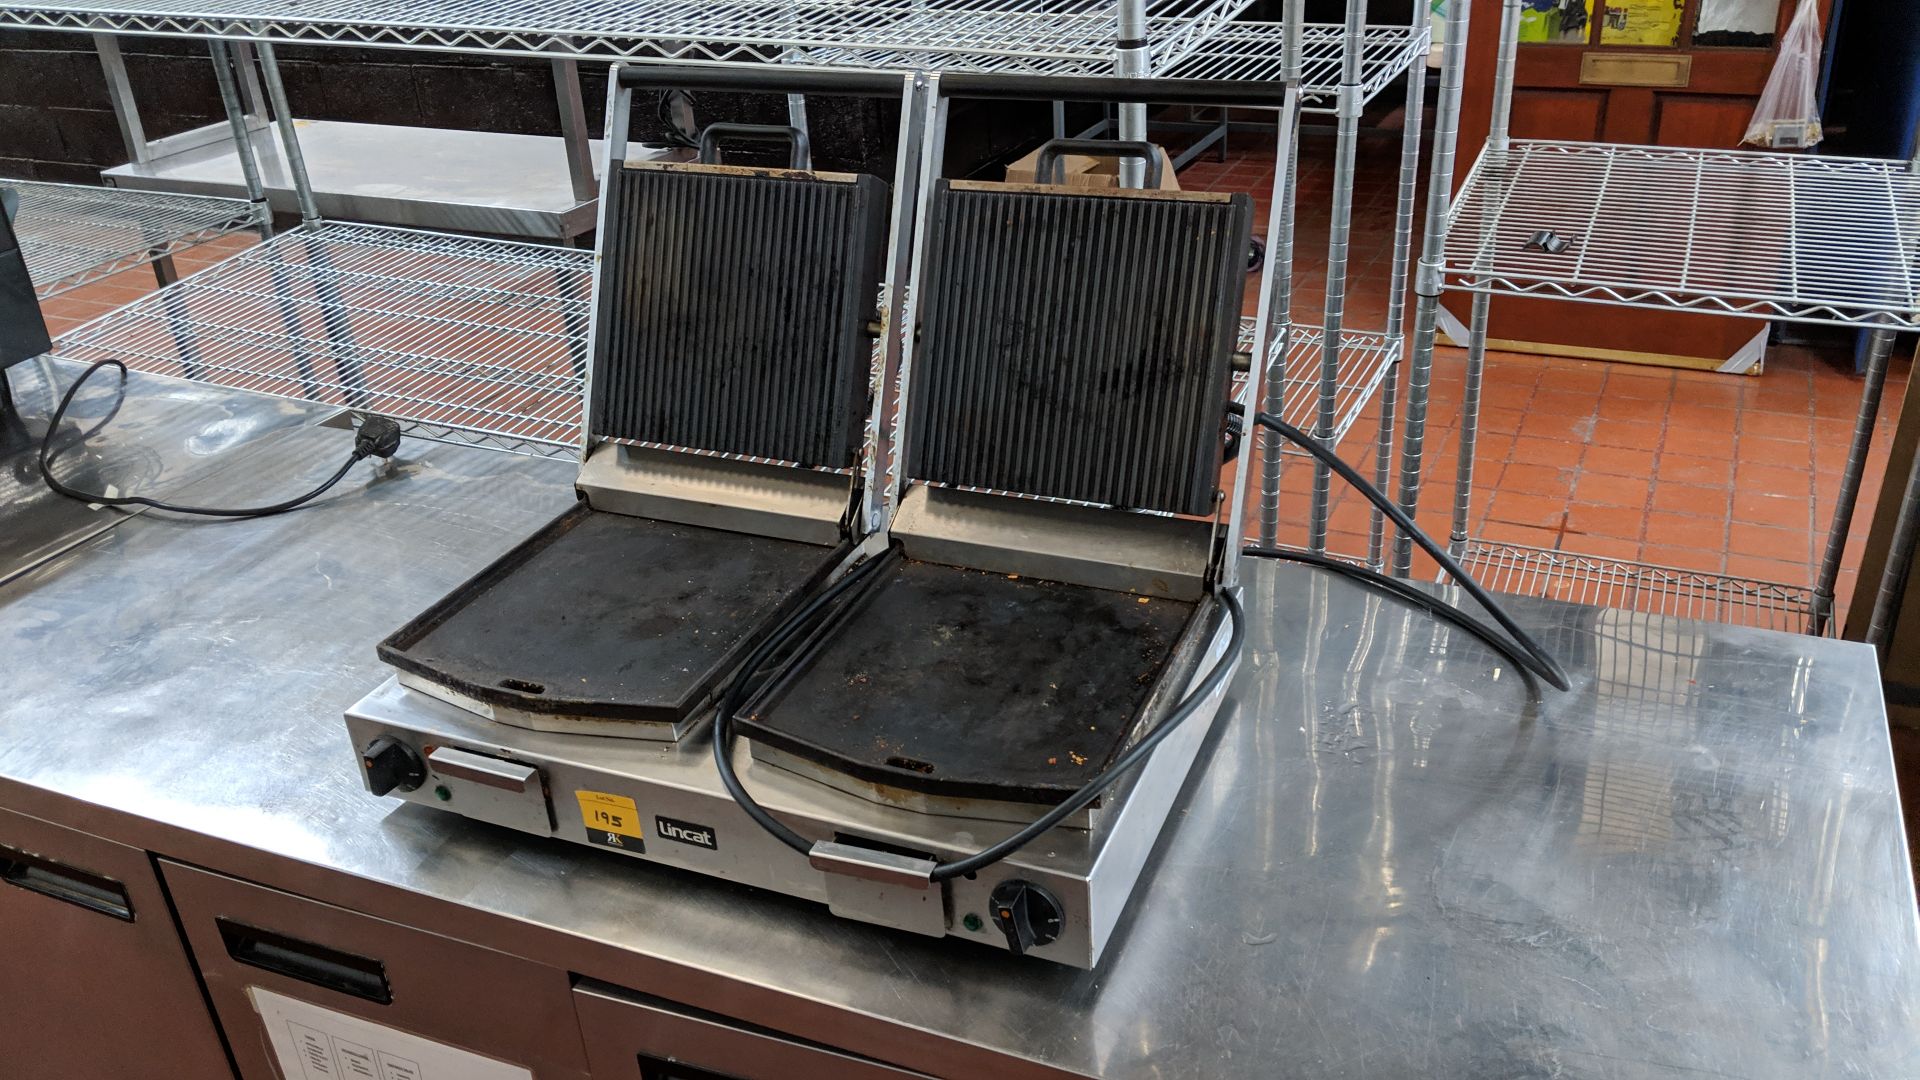 Lincat LRG2 double twin contact grill Lots 80 - 95 & 168 - 249 consist of café furniture, catering - Image 5 of 5